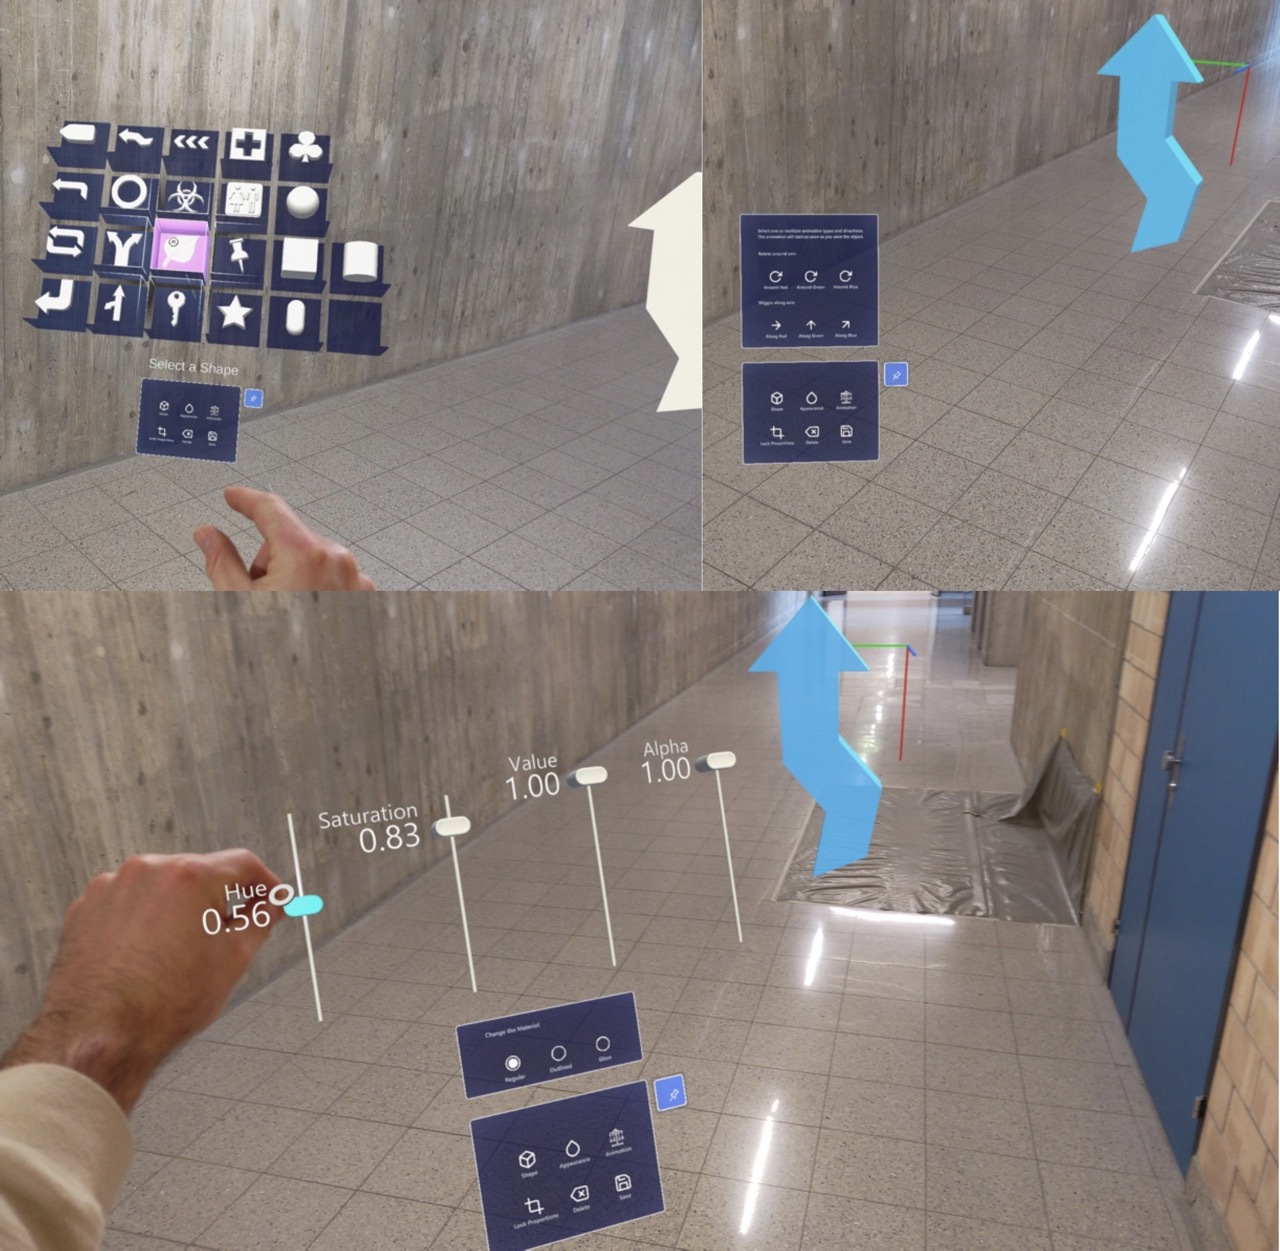 Interacting with augmented reality for designing future navigation experiments. Photo credit: GIVA